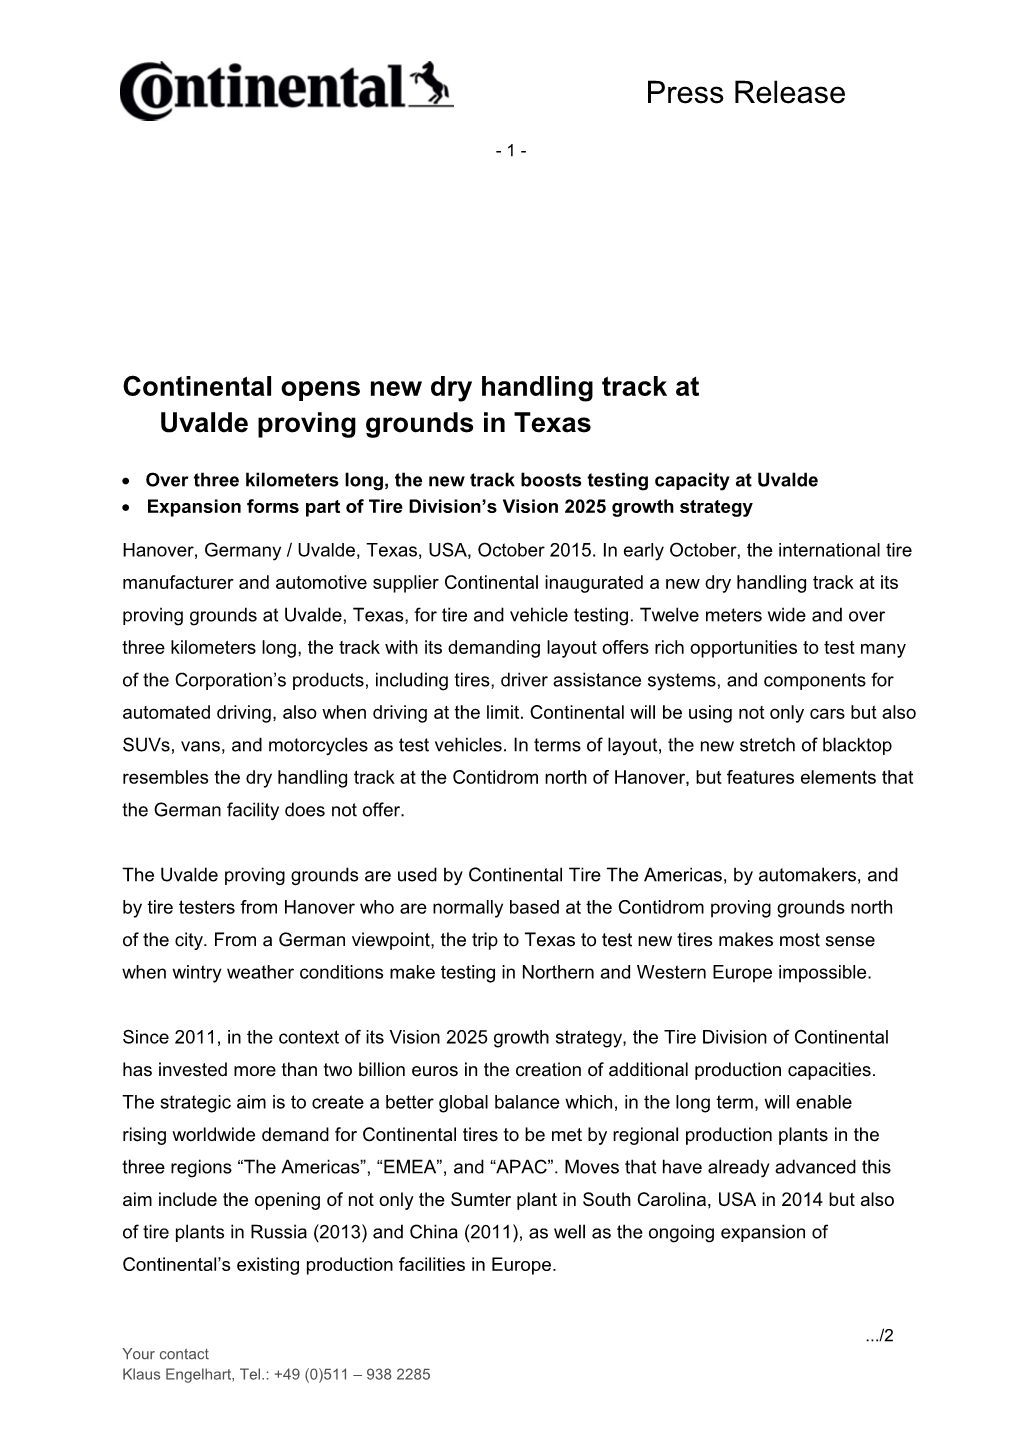 Continental Opens New Dry Handling Track at Uvalde Proving Grounds in Texas